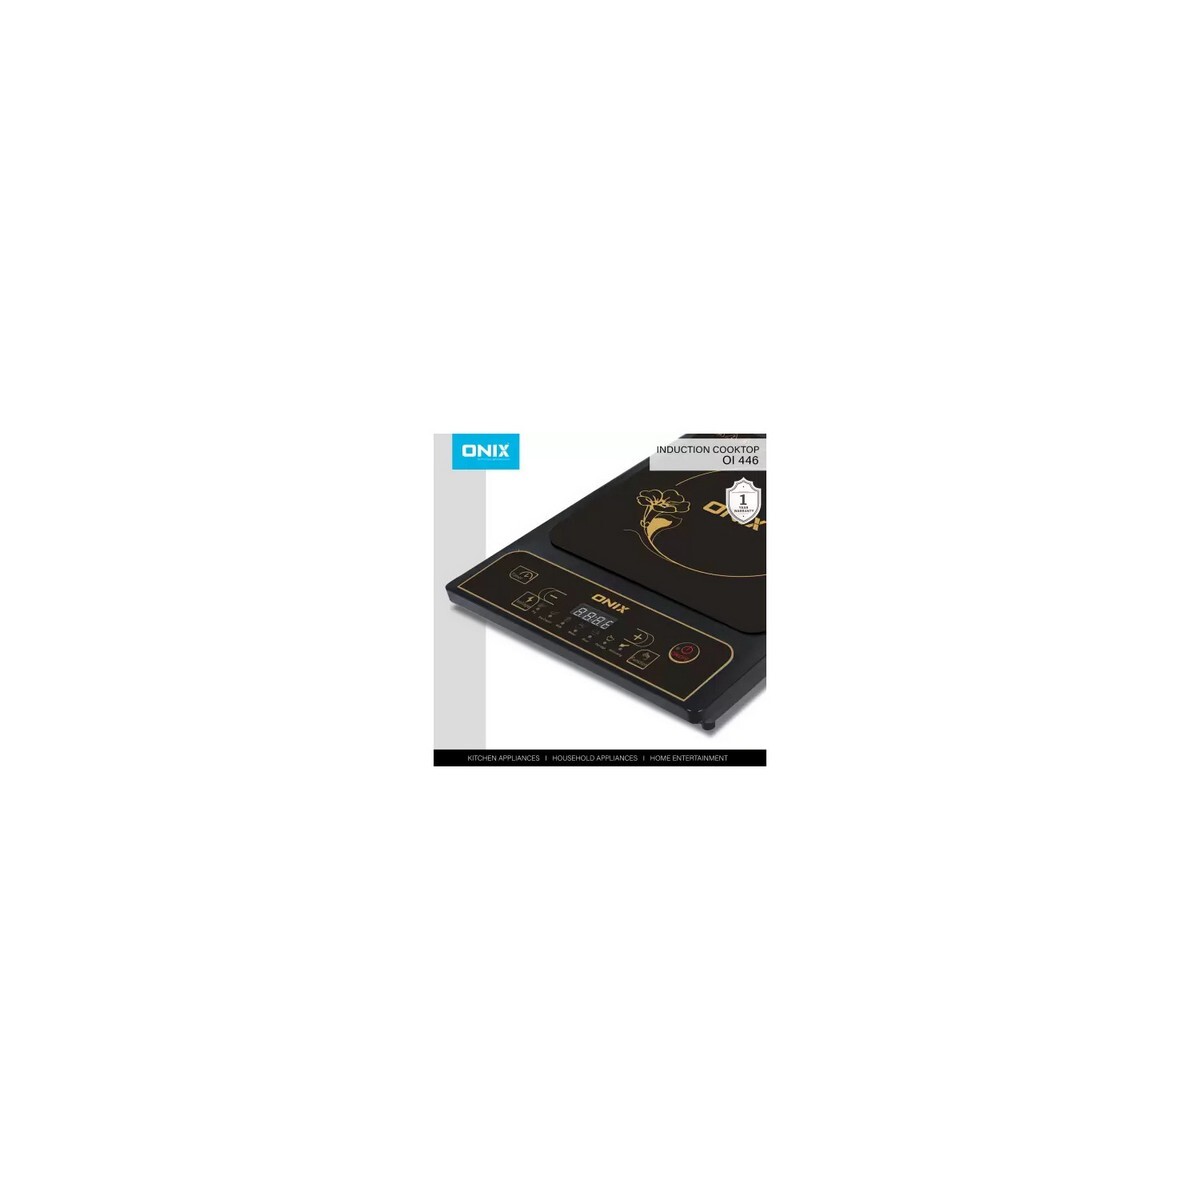 Onix OI446 Induction Cooker